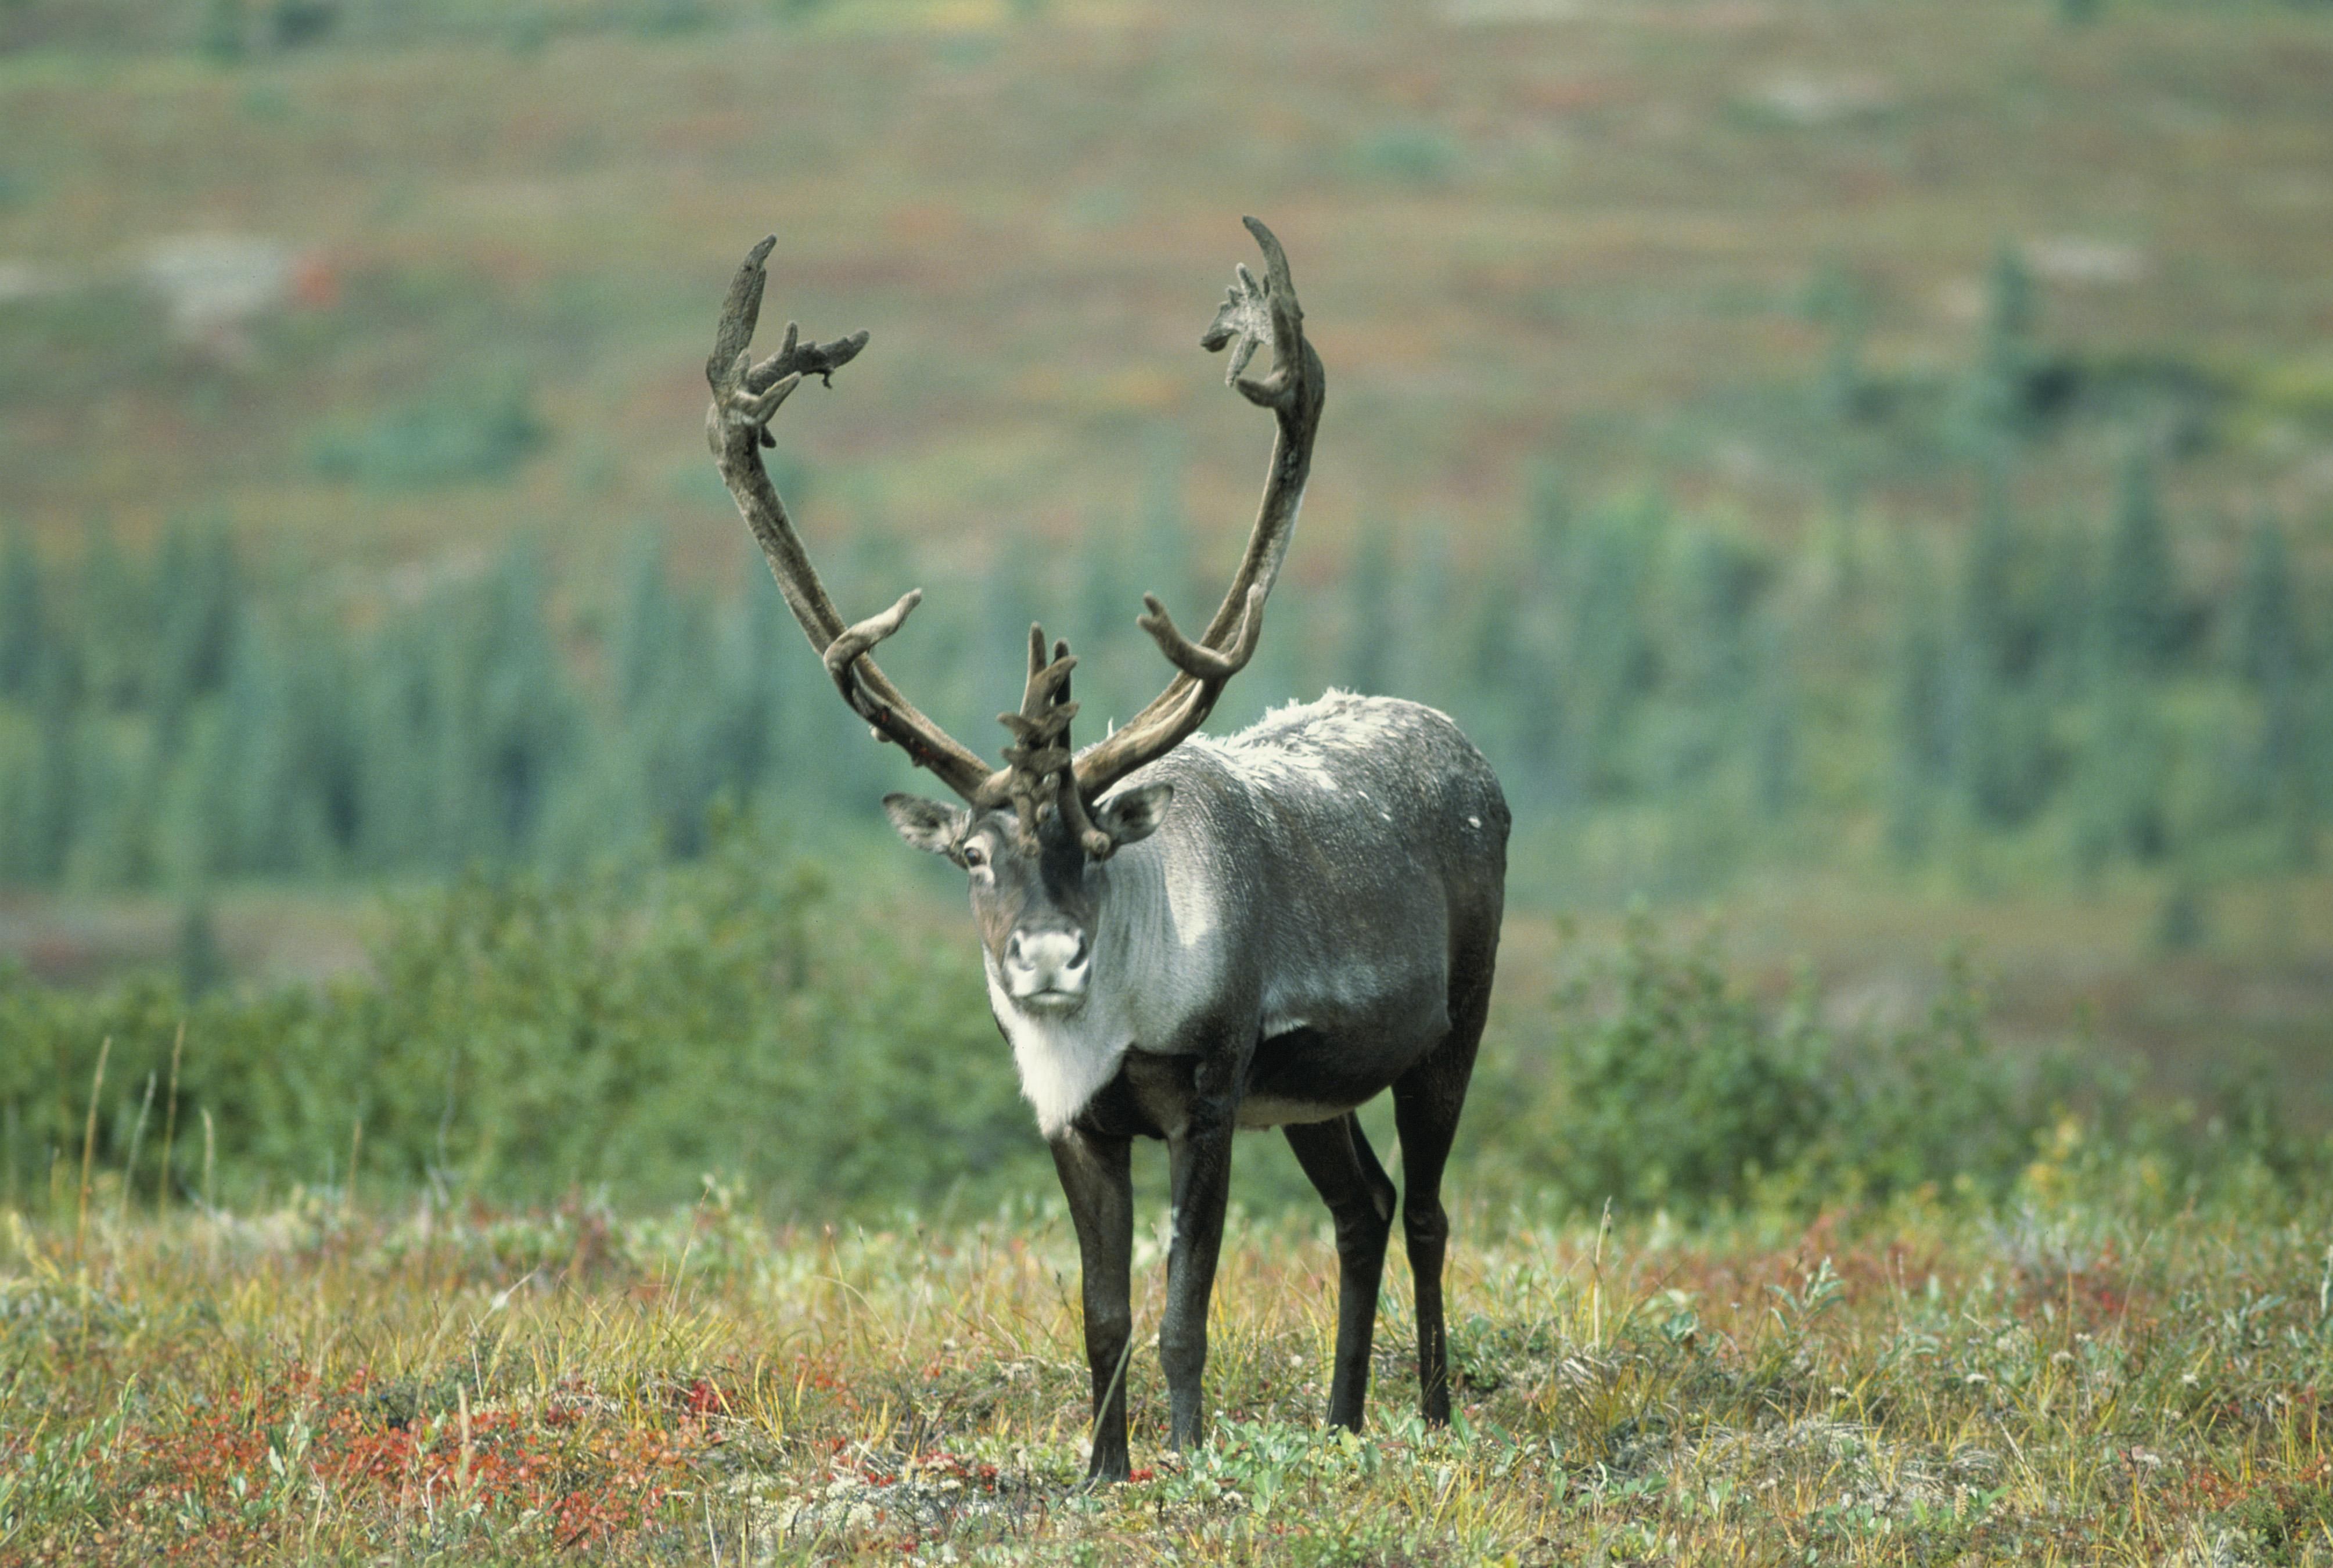 Caribou with large antlers surrounded by grass and forest